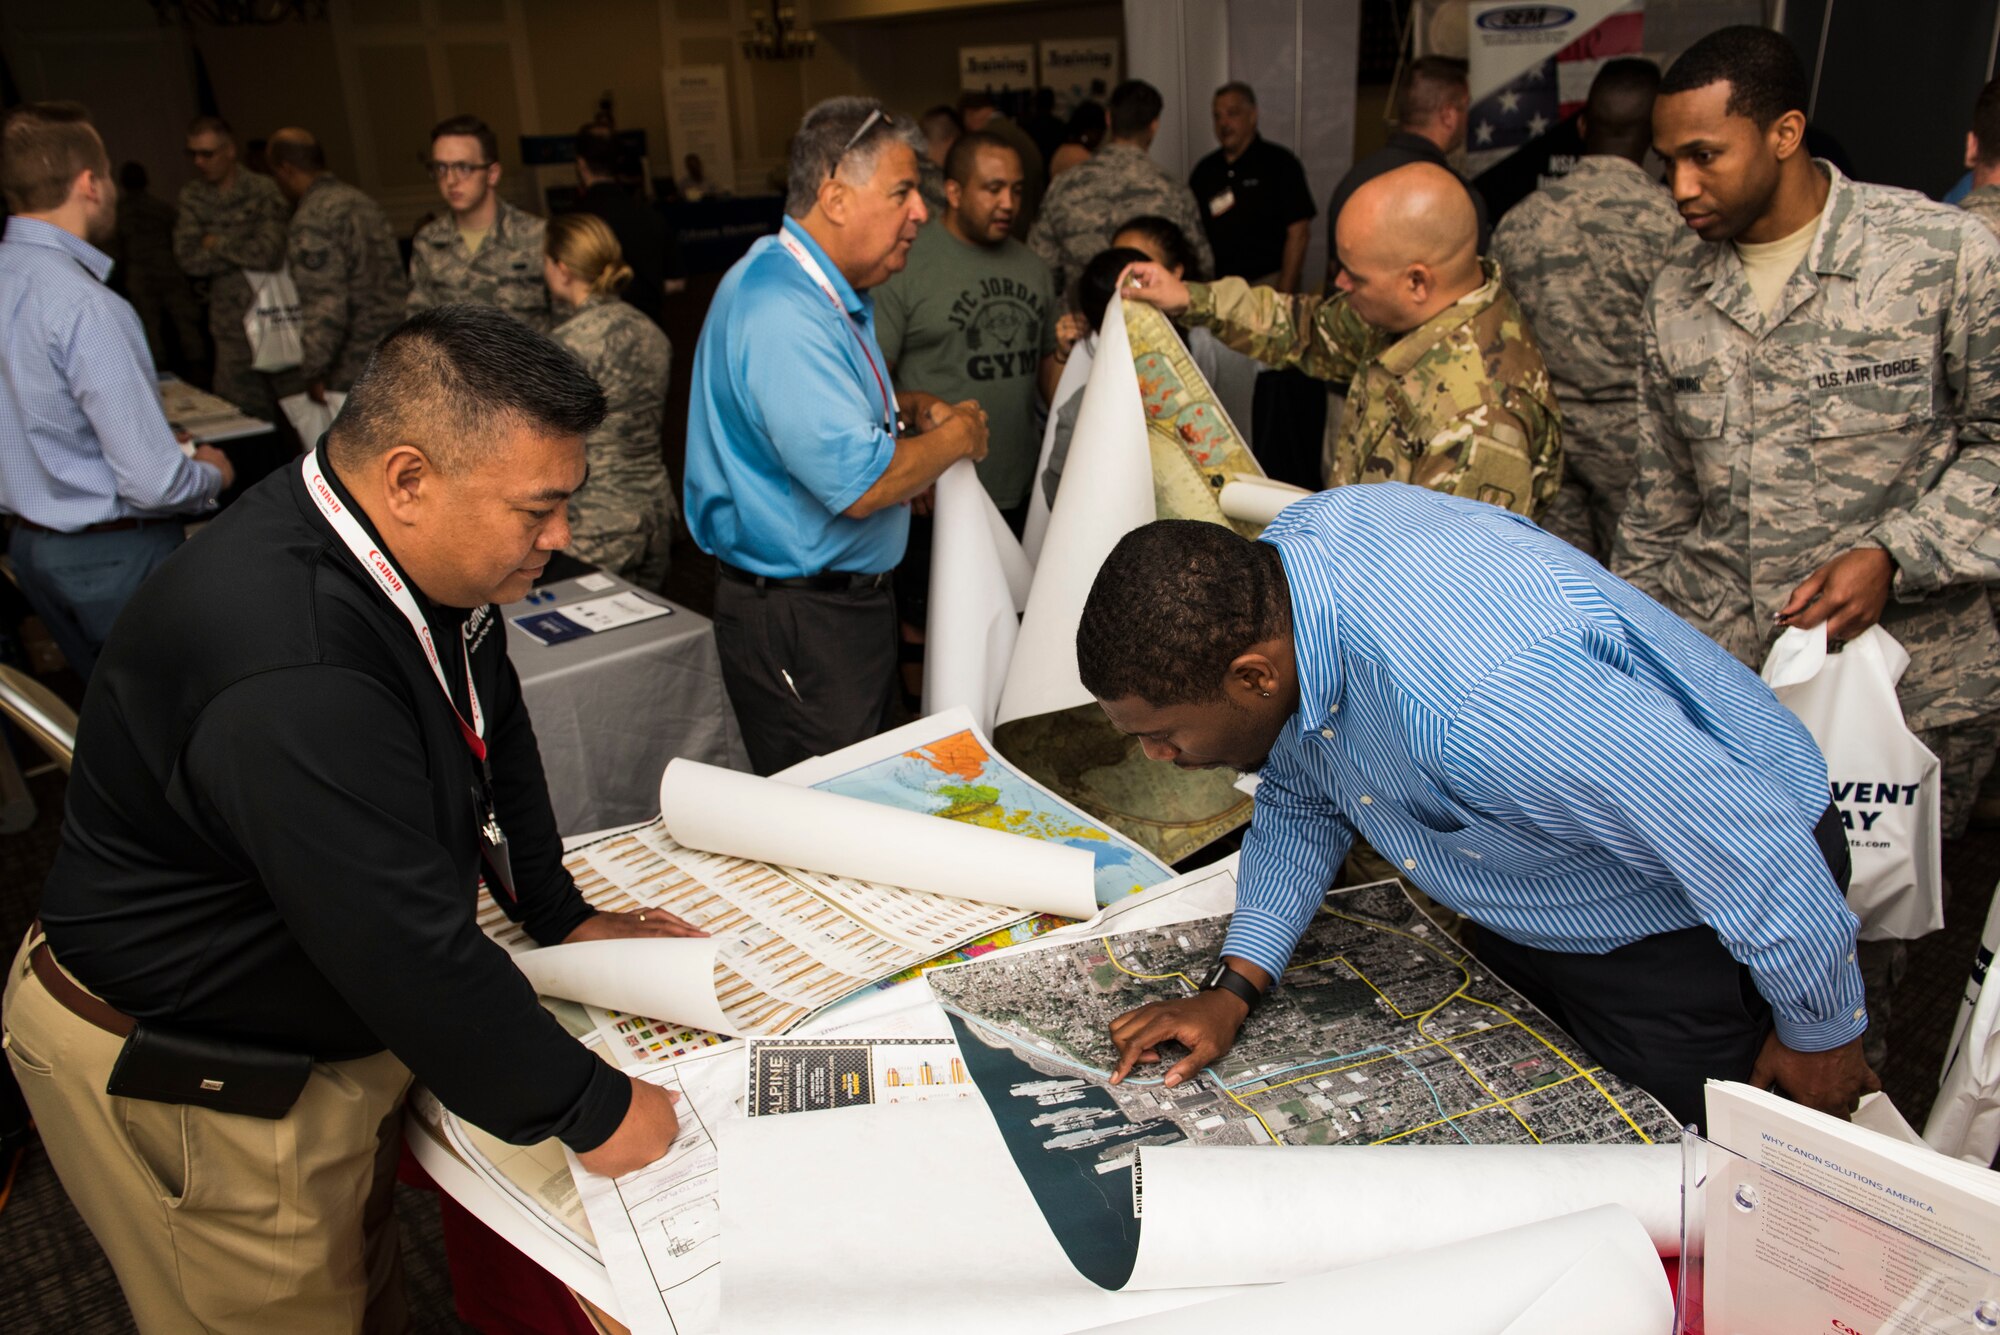 Team Shaw members network during a technology exposition at Shaw Air Force Base, S.C., May 16, 2018.